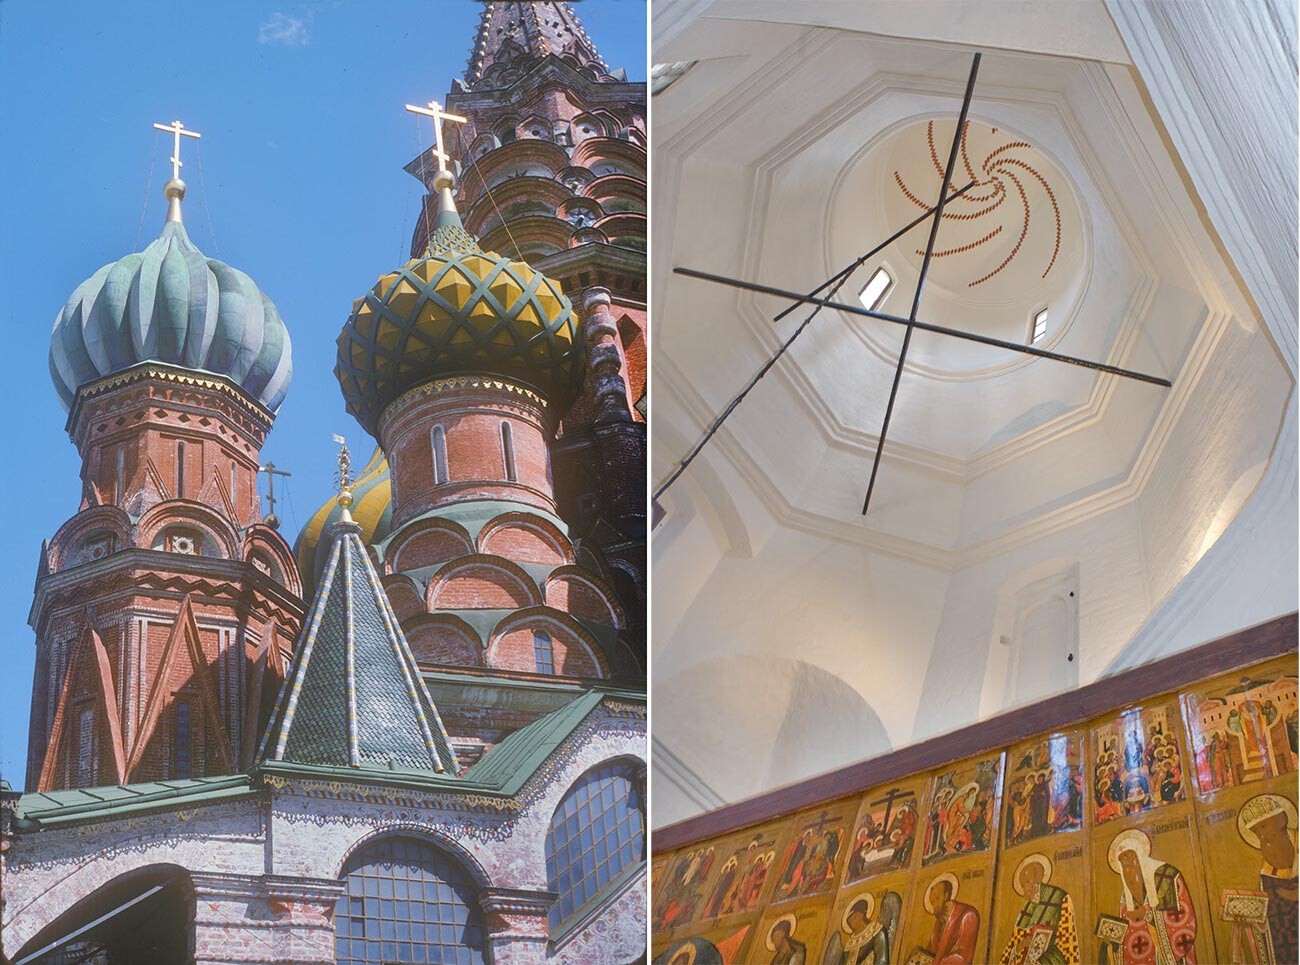 Lleft: St. Basil's, west view. Church of St. Gregory (right) & Church of Sts. Cyprian & Justina. June 15, 1994.
Right: St. Basil's, Church of St. Gregory of Armenia, interior. View toward dome with upper tiers of icon screen. June 2, 2012